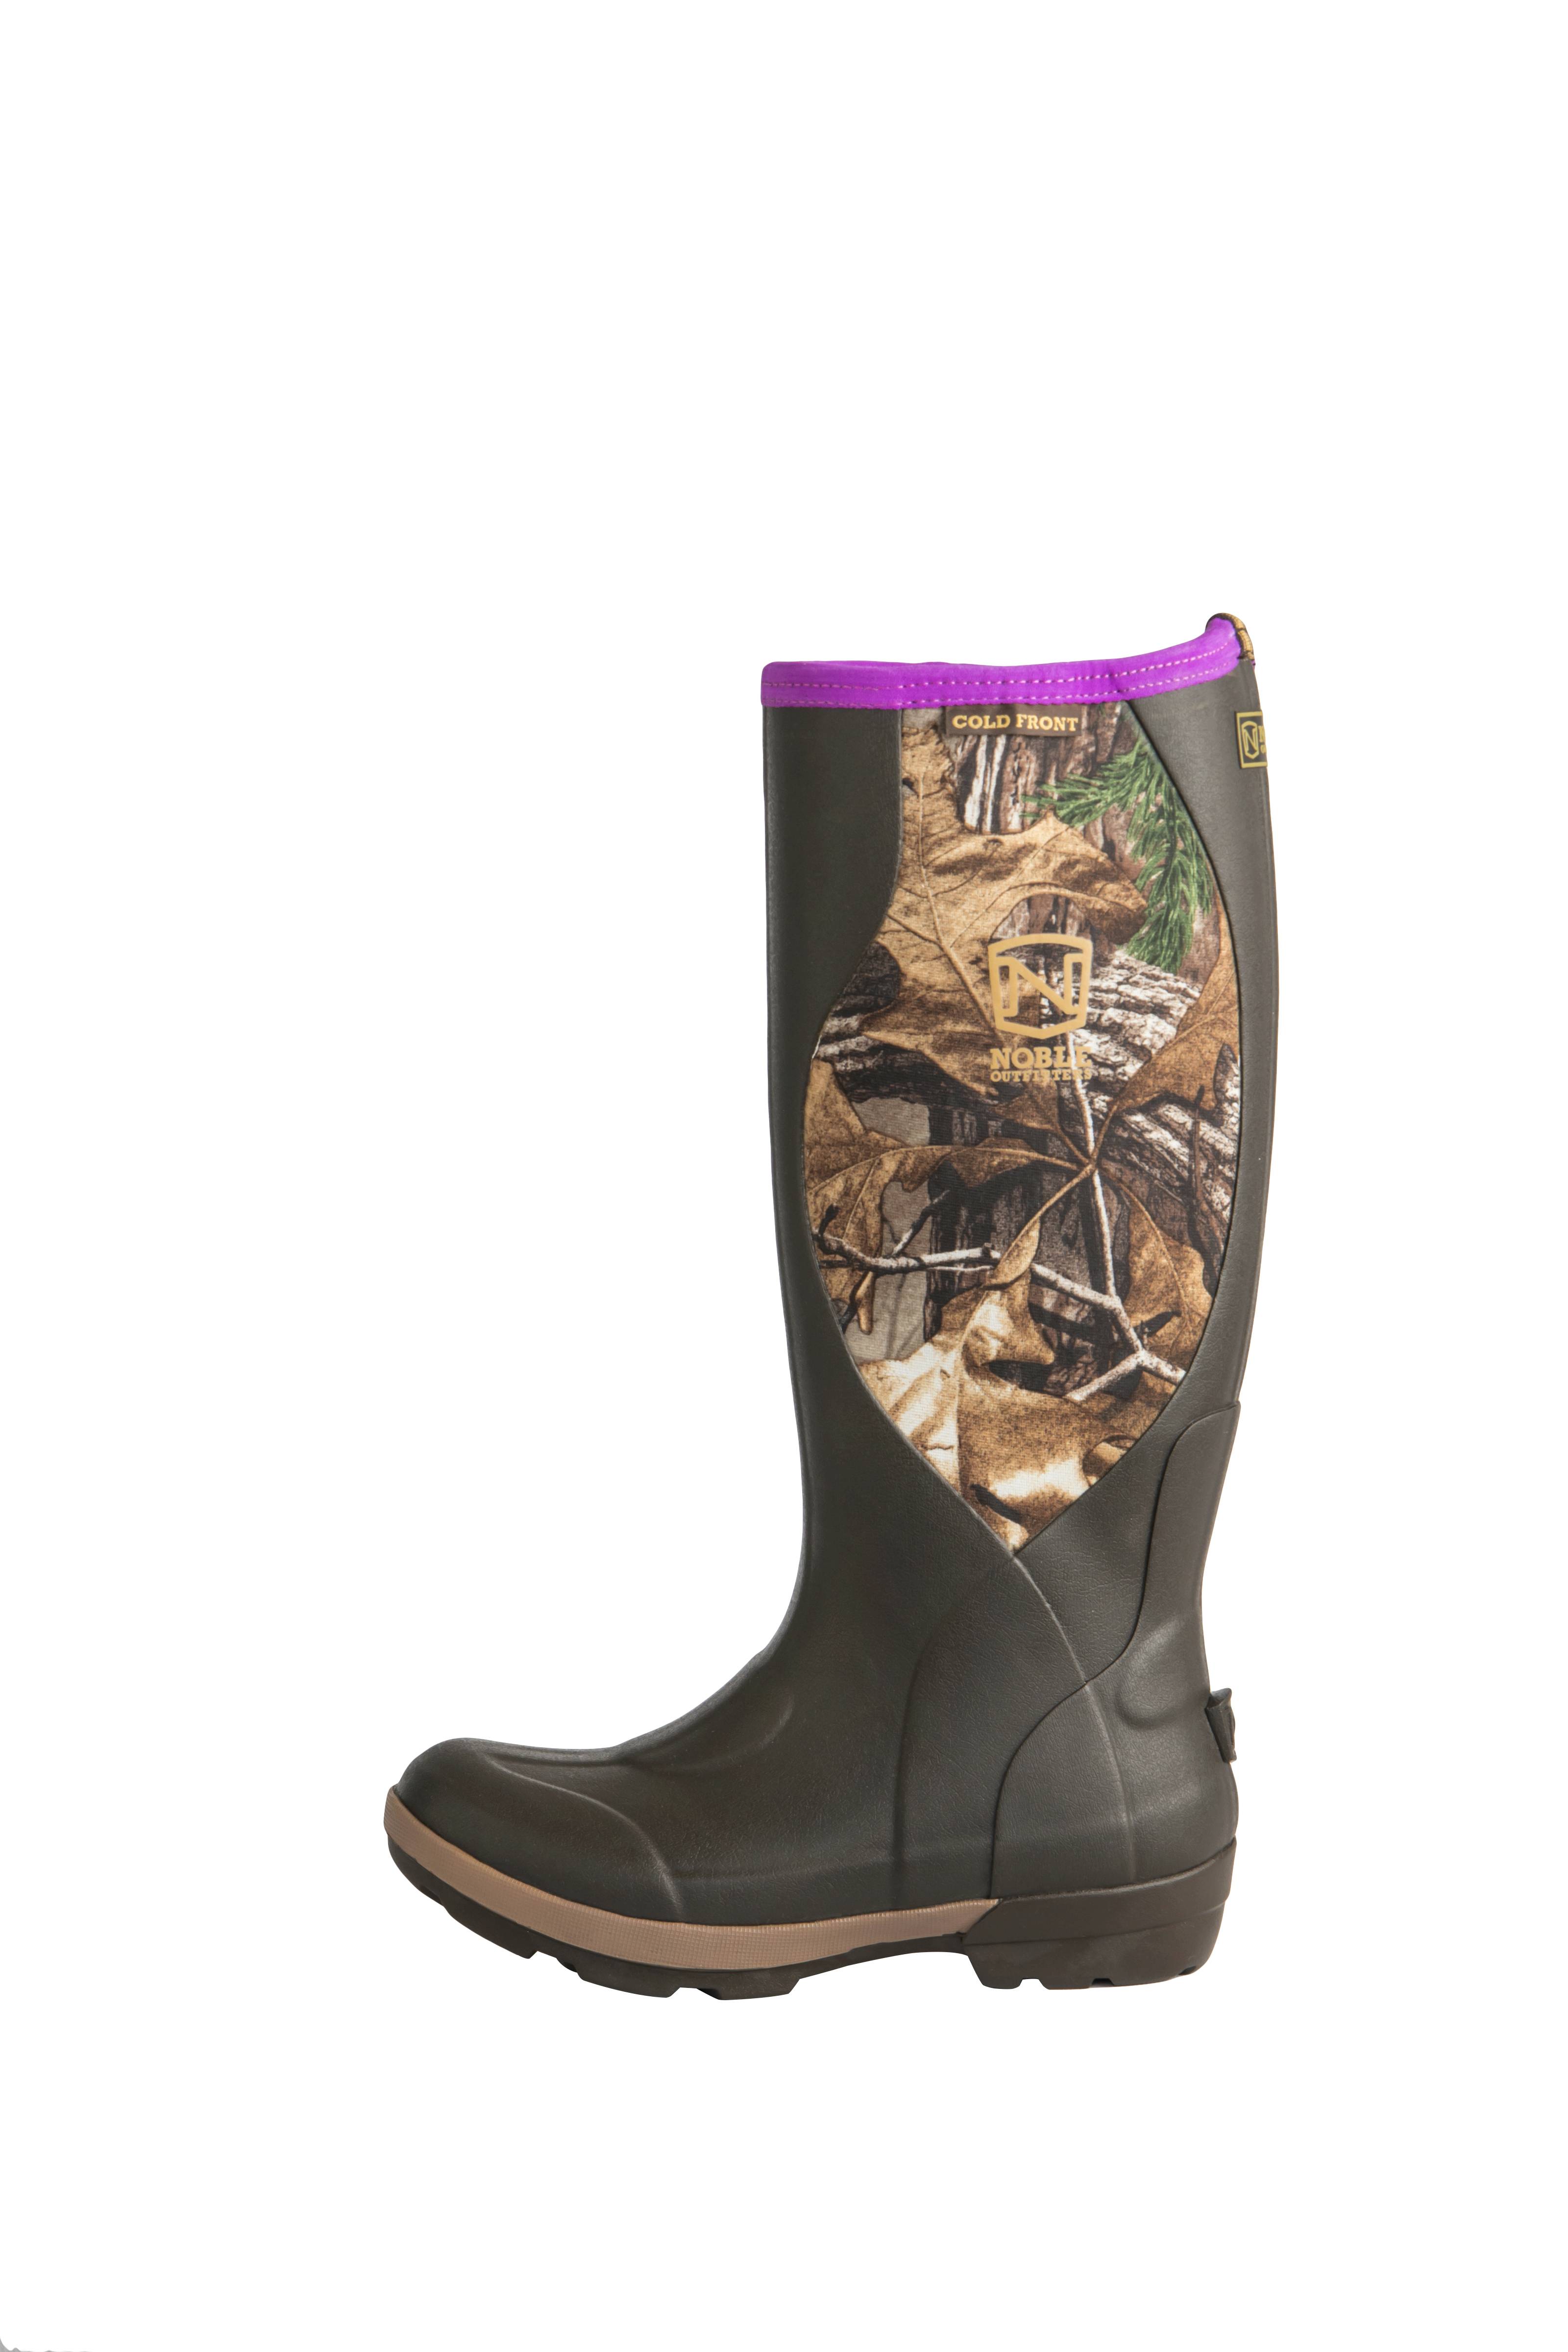 Noble Outfitters Women Cold Front Camo High Boots